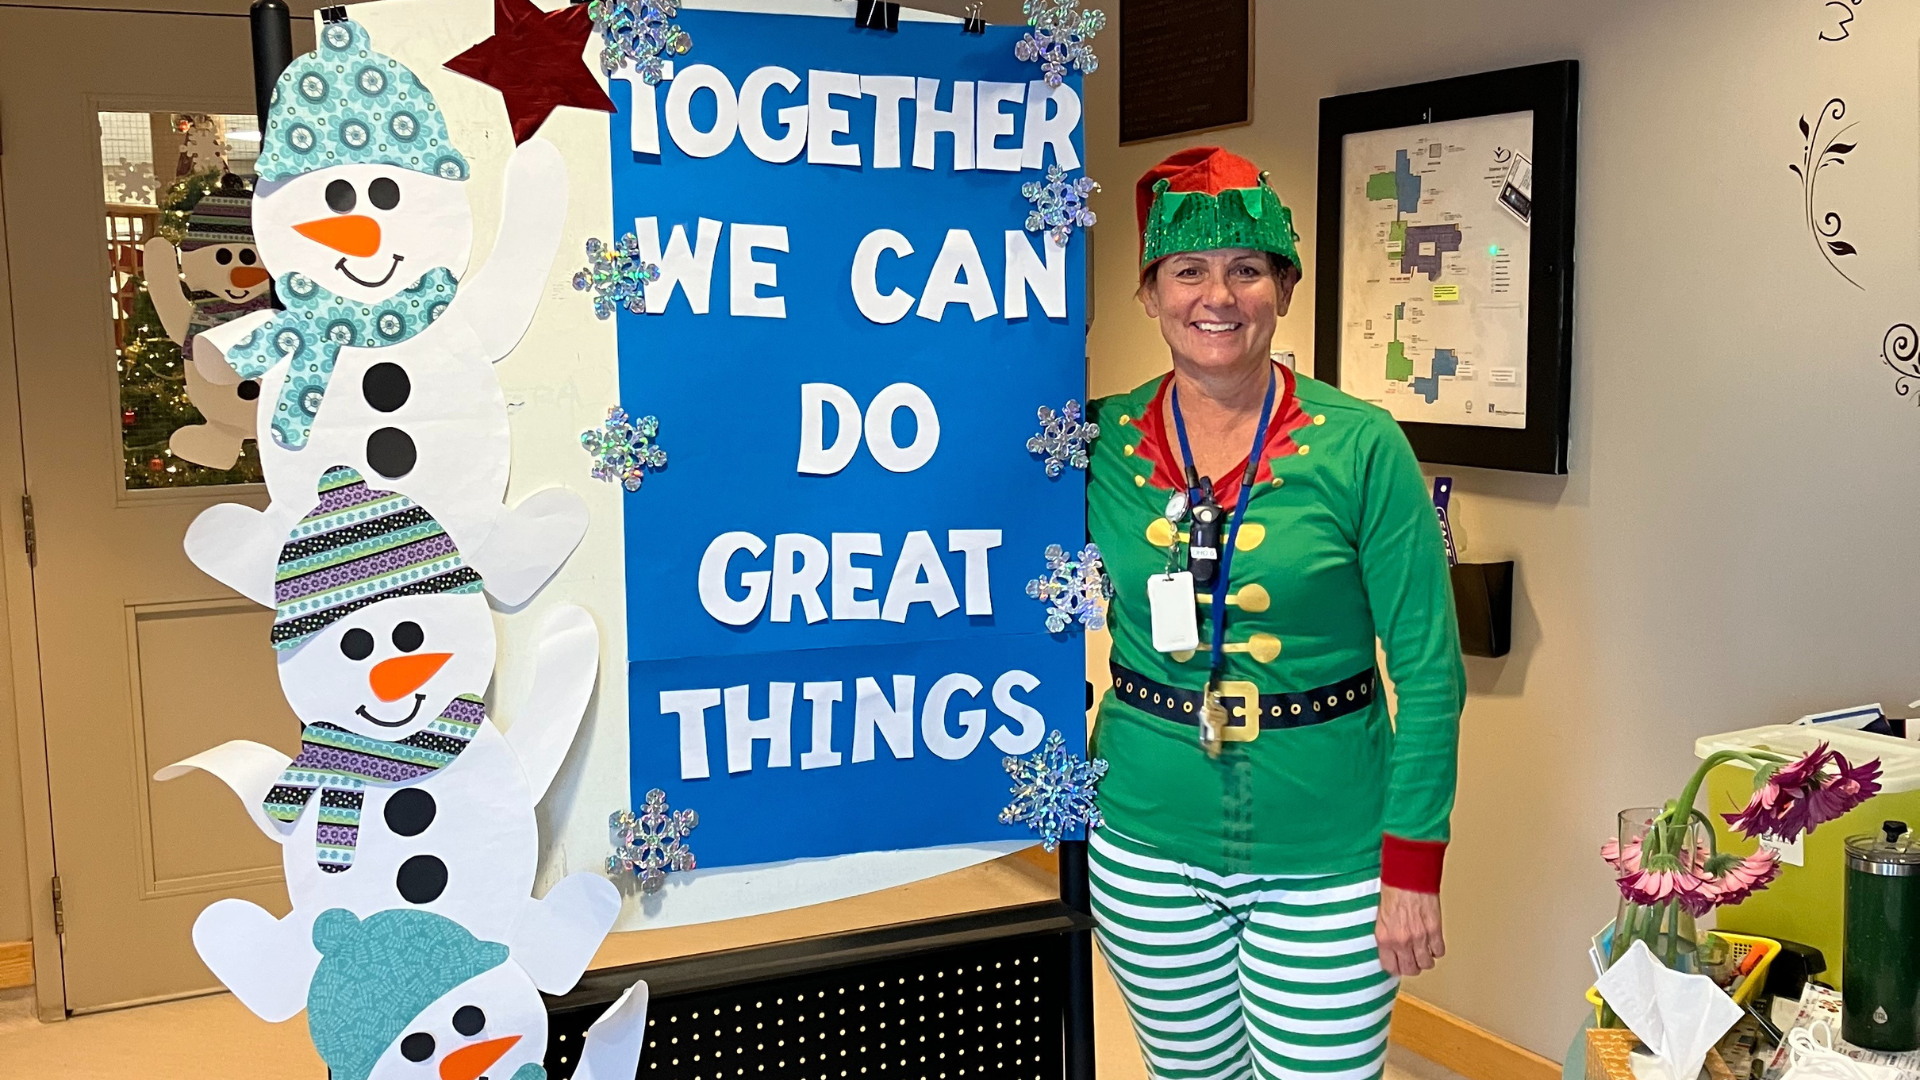 A woman dressed as an elf standing next to a blue Christmas sign that reads: “together we can do great things.”